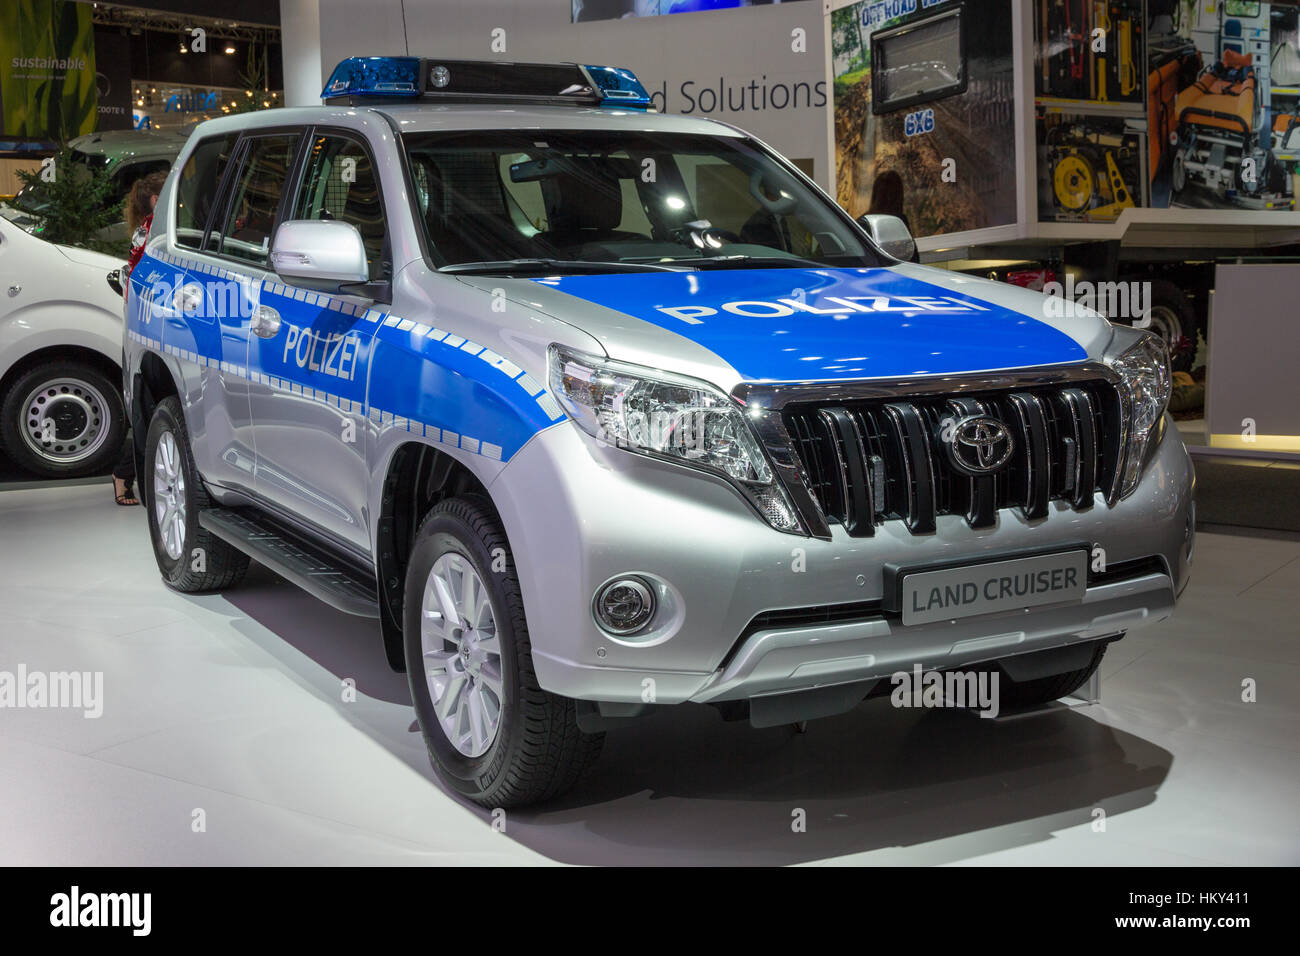 HANNOVER, GERMANY - SEP 21, 2016: German Police Toyota Land Cruiser on display at the International Motor Show for Commercial Vehicles. Stock Photo